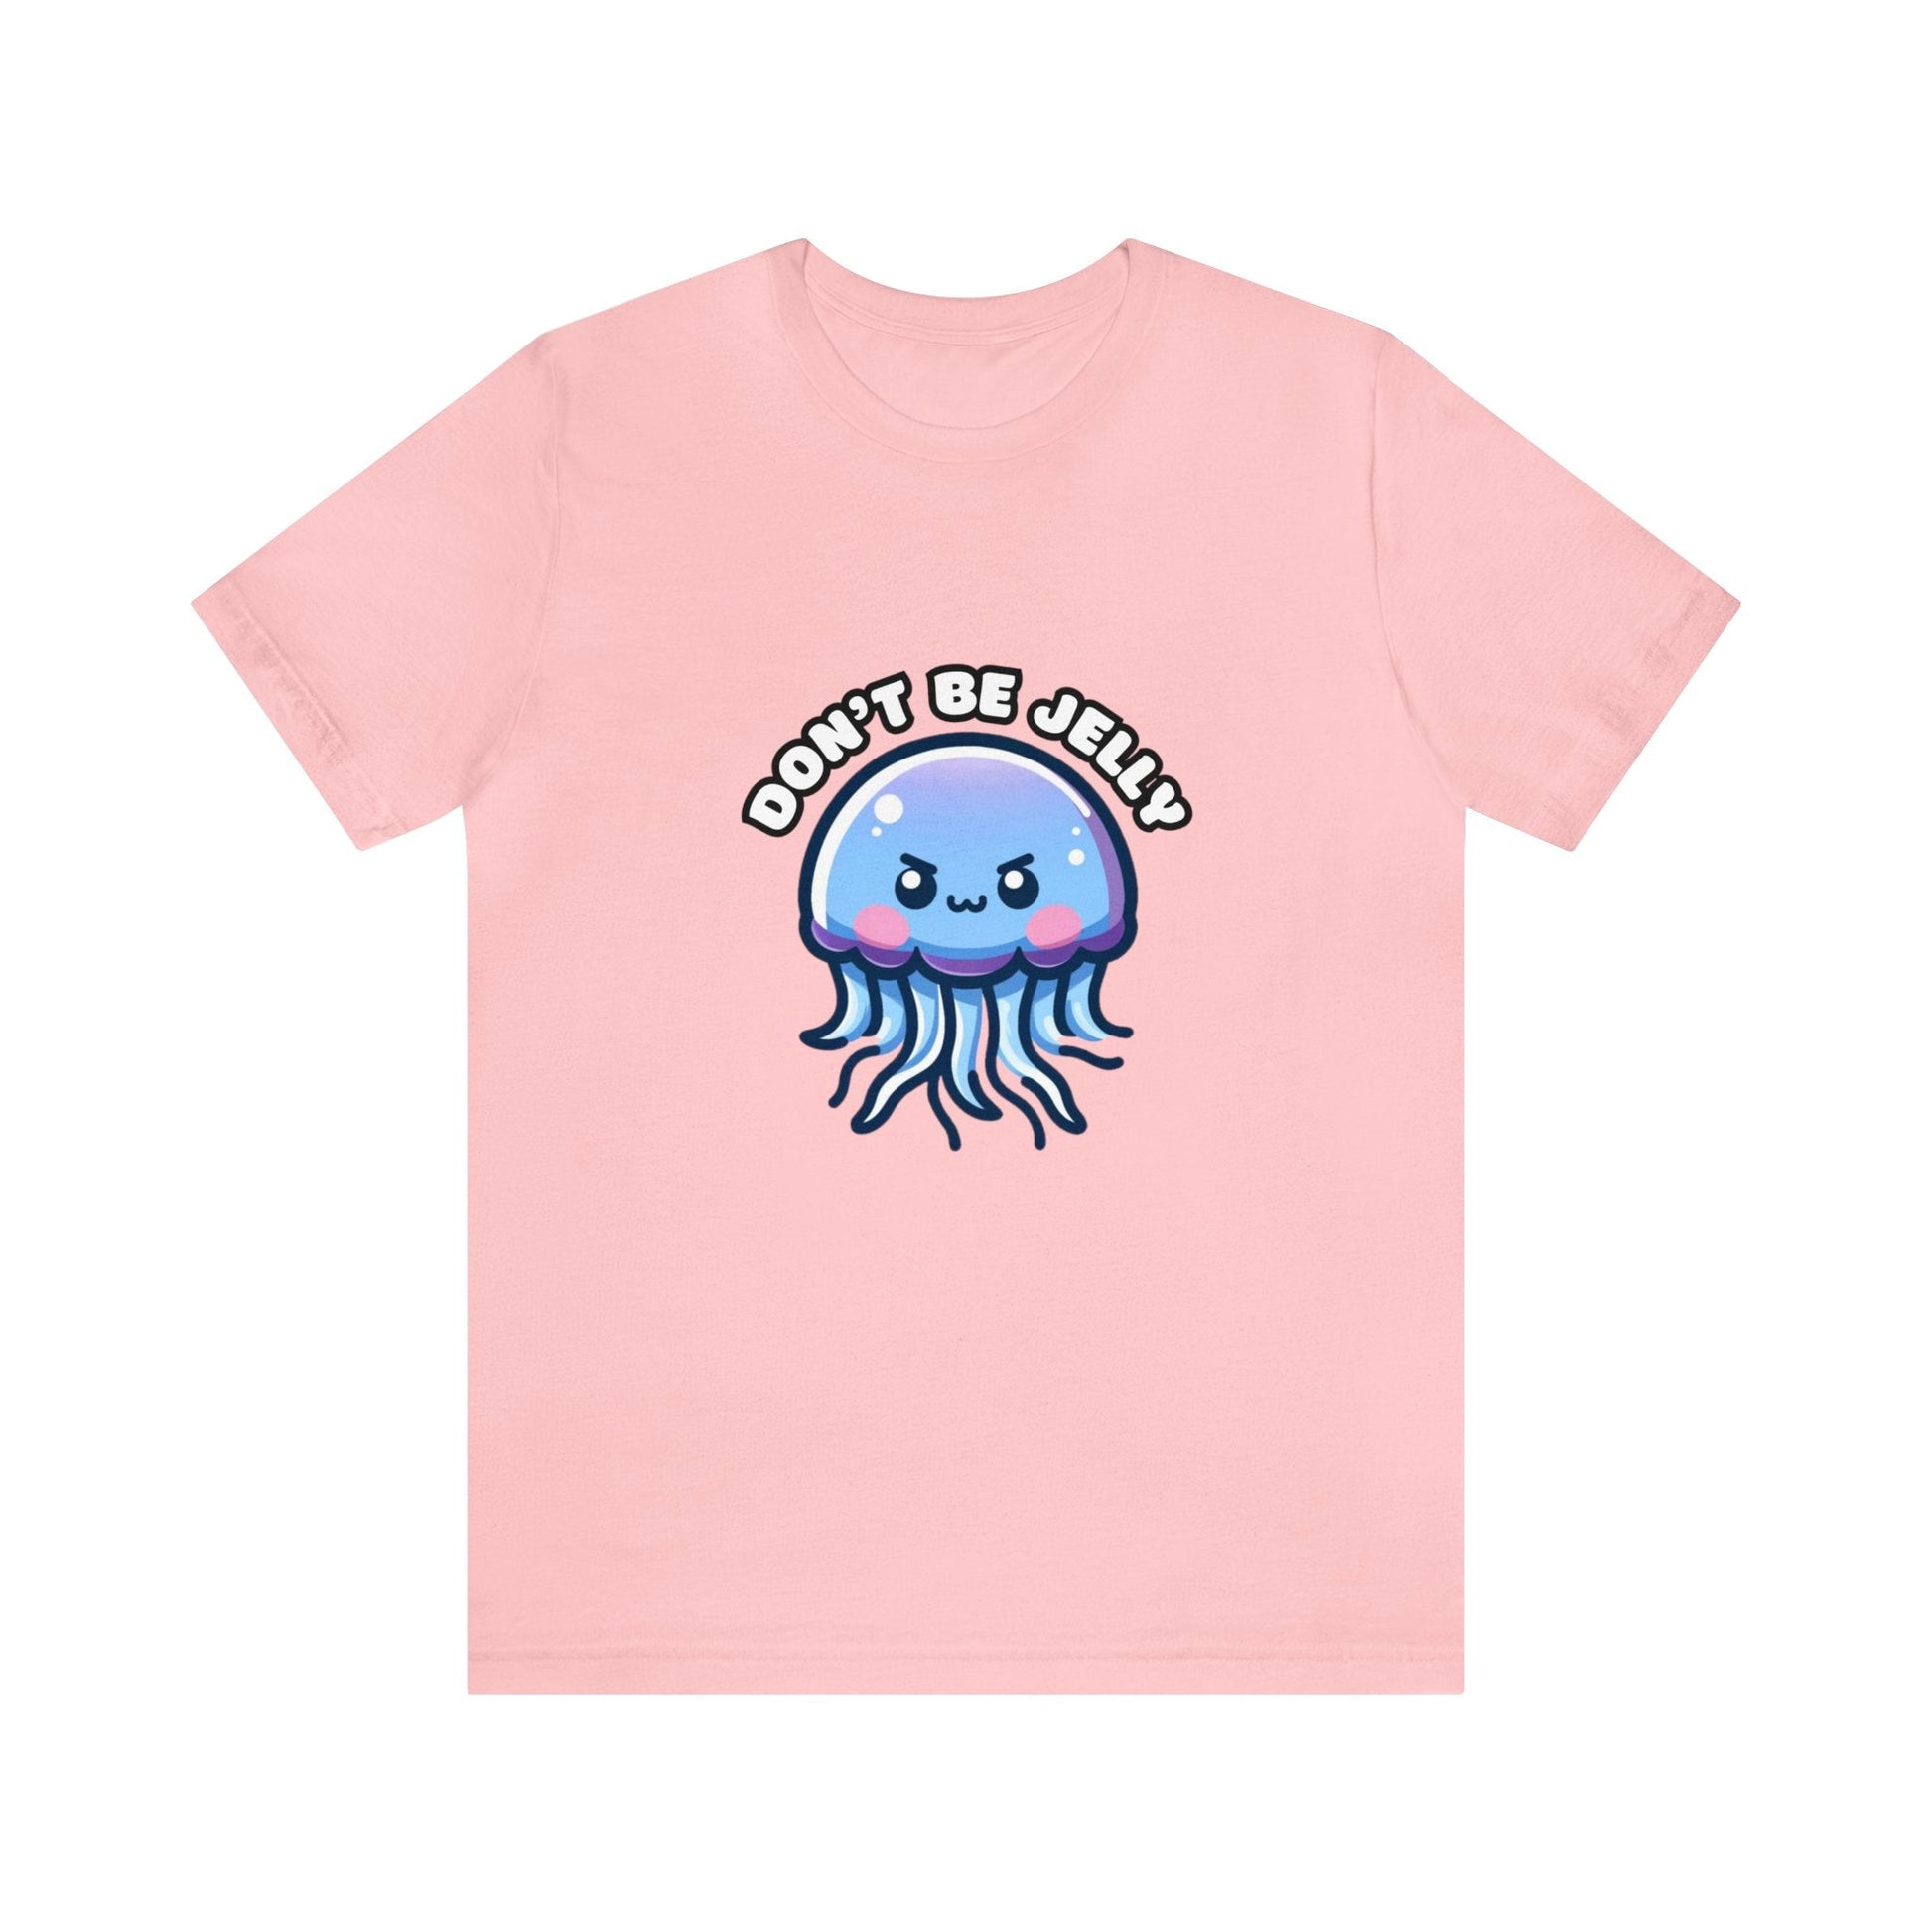 US - Don't Be Jelly - Jellyfish T-shirt Pink / XS